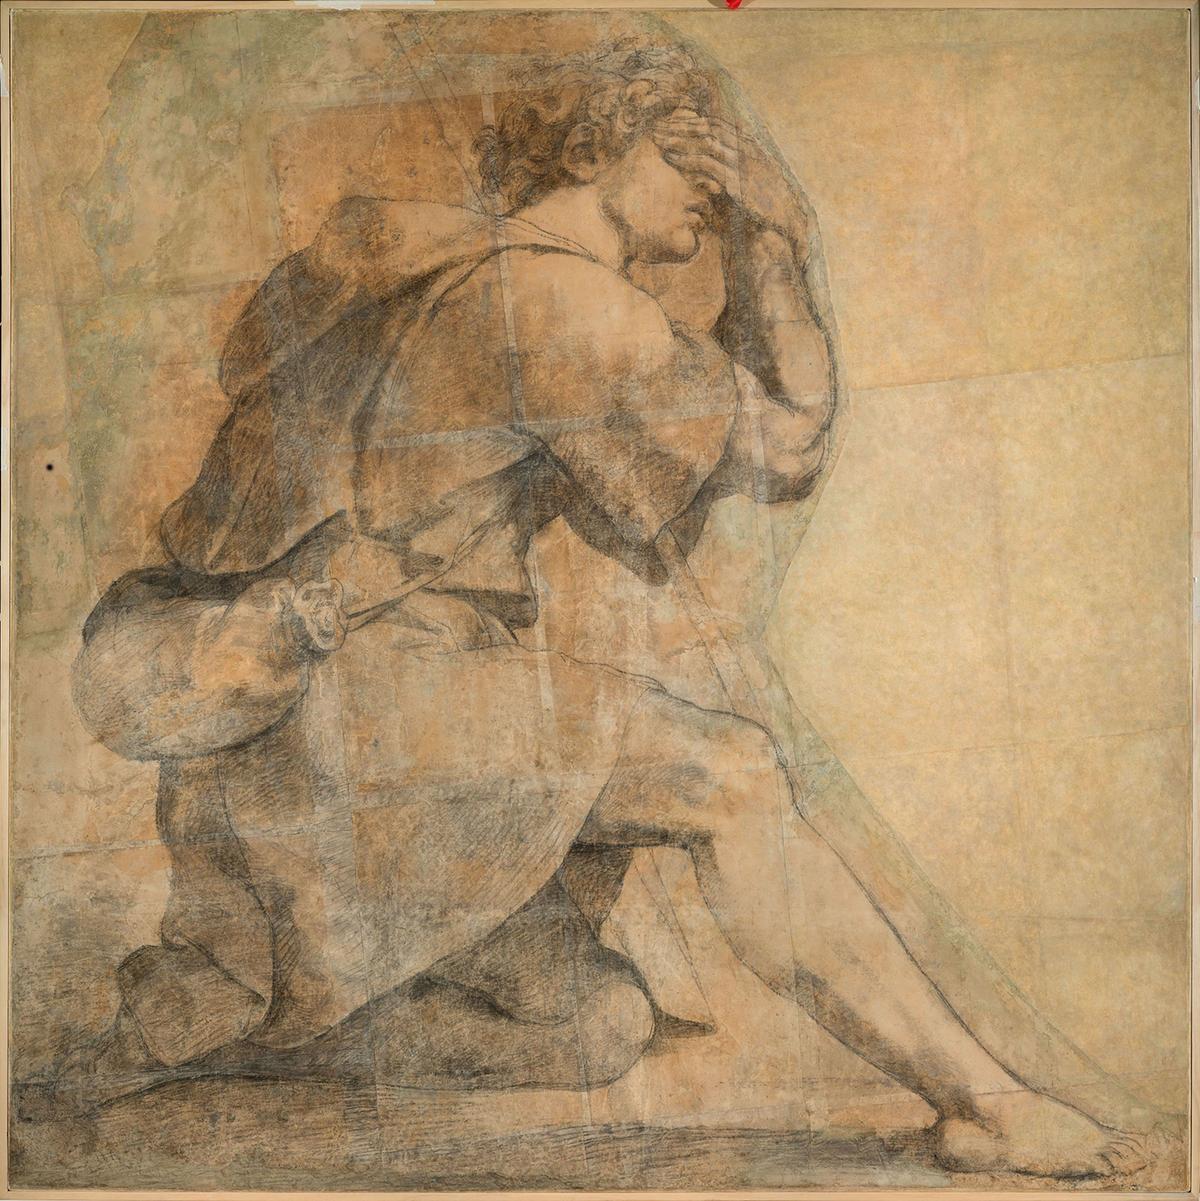 "Moses before the Burning Bush," 1514, by Raphael. Charcoal and black chalk on paper, pricked for transfer; 54.3 by 55.1 inches. (Courtesy of the Louvre)